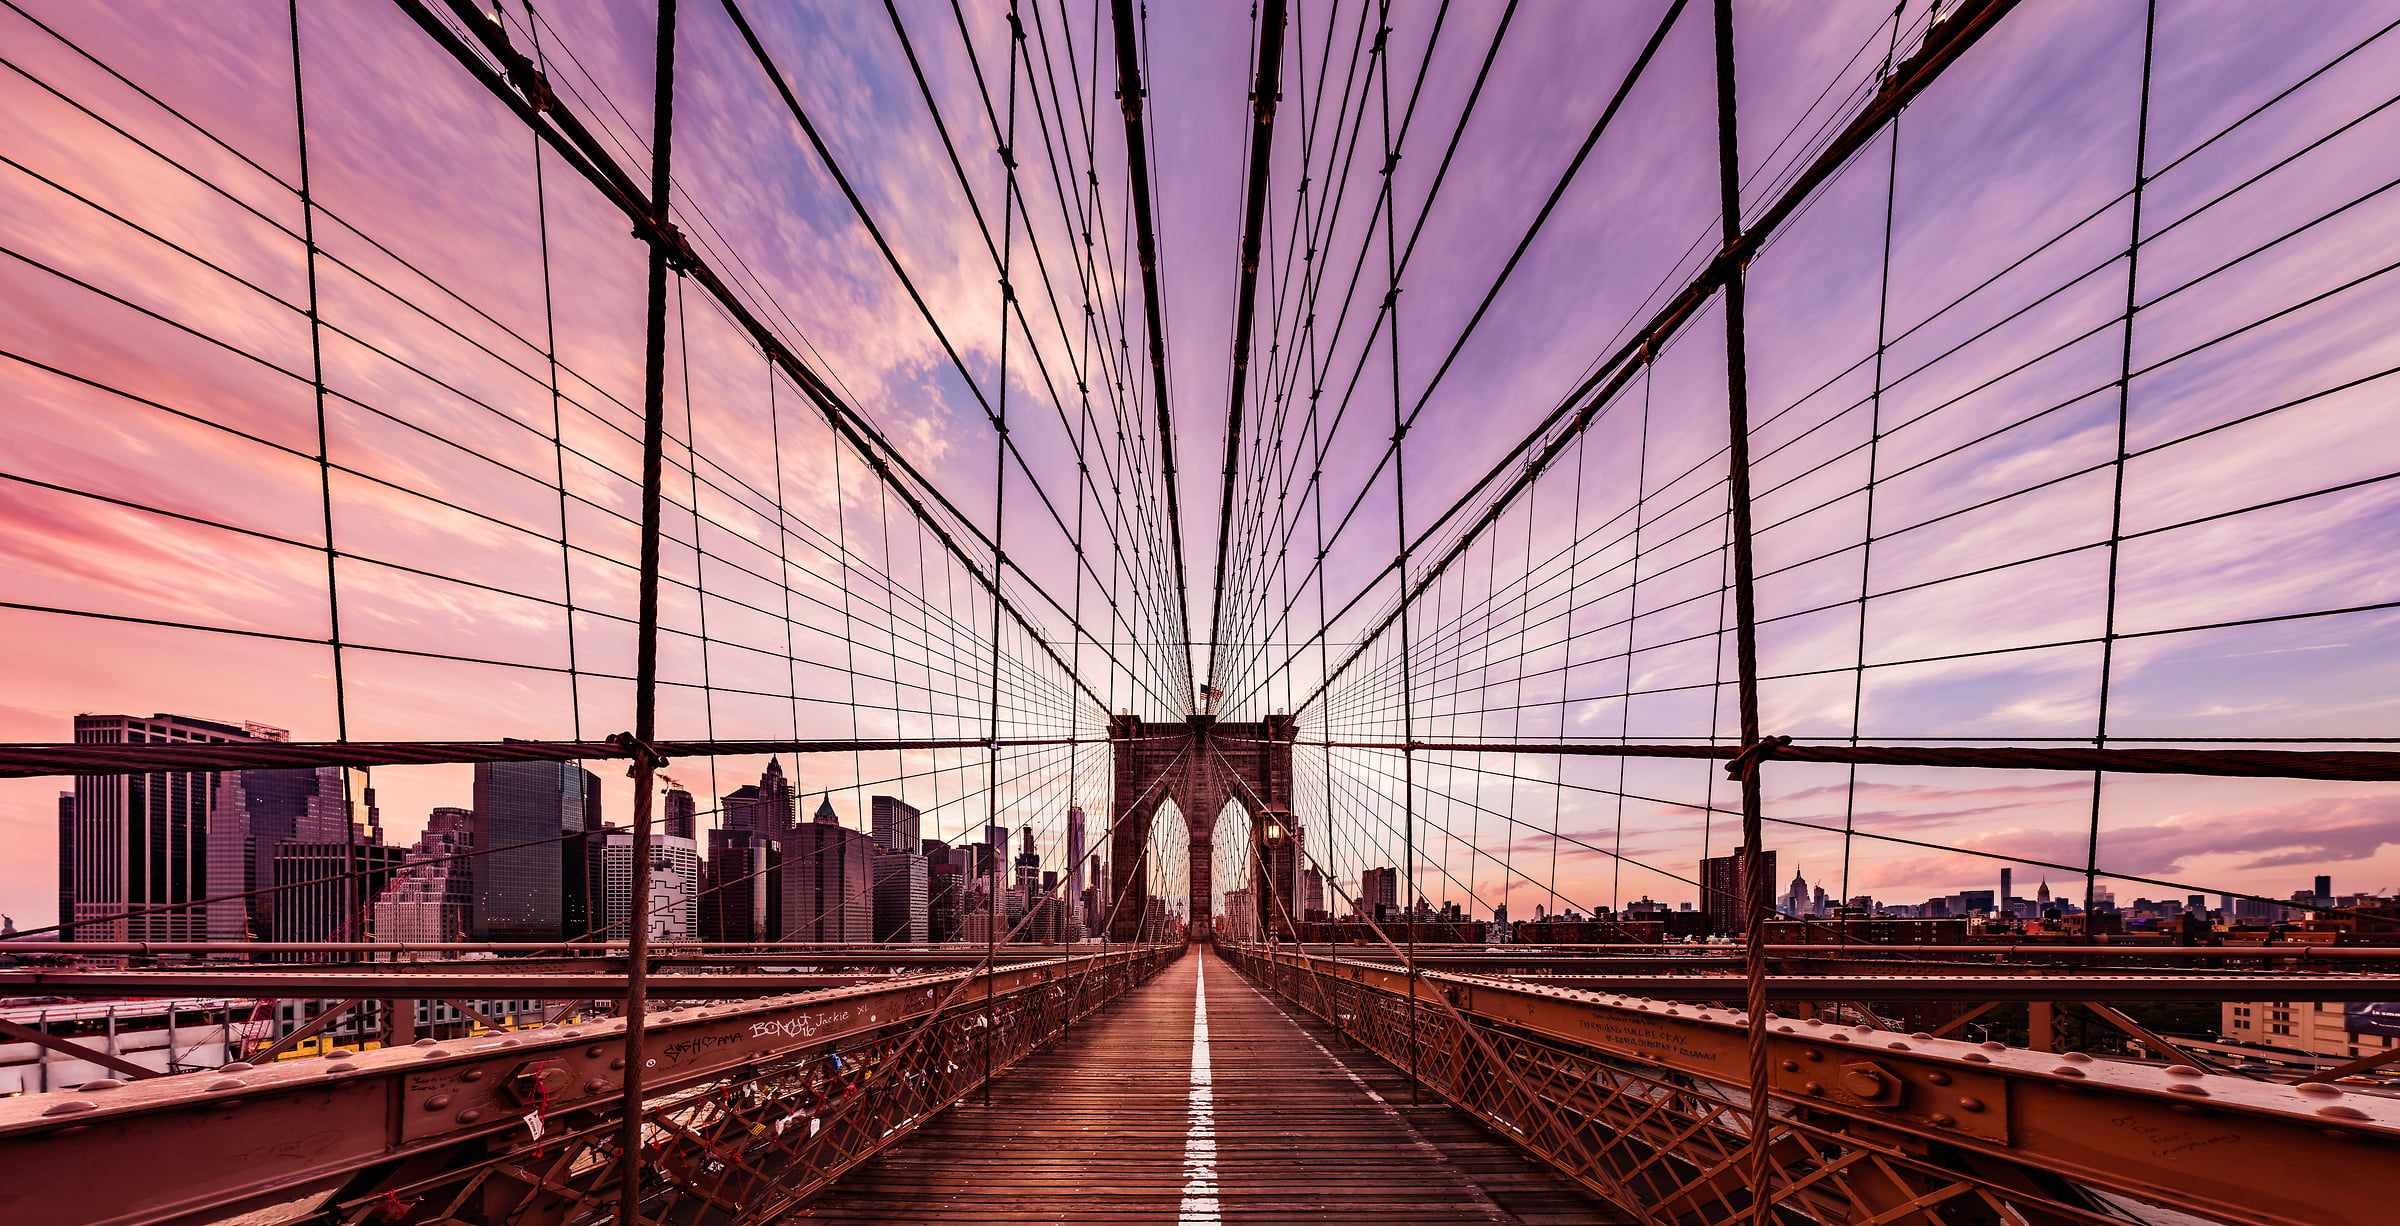 1,953 megapixels! The highest resolution VAST photo of the Brooklyn Bridge walkway path at sunset in New York City; created by Dan Piech.